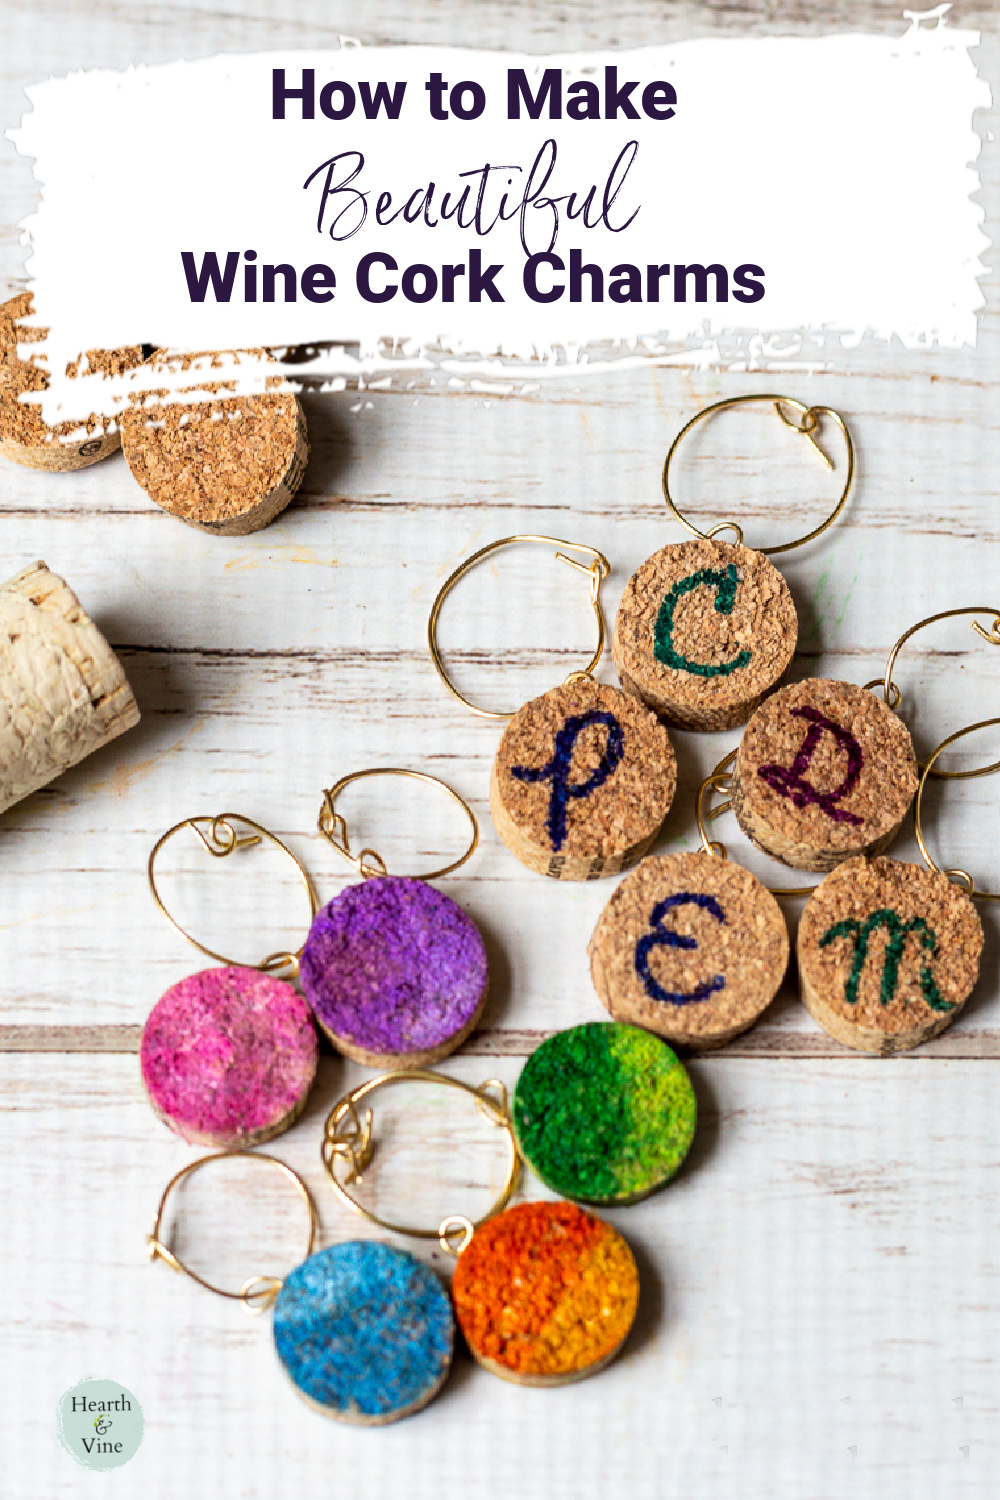 Wine charms made out of slices of wine corks and gold wire. Some have letters on them and some are colored with ink.